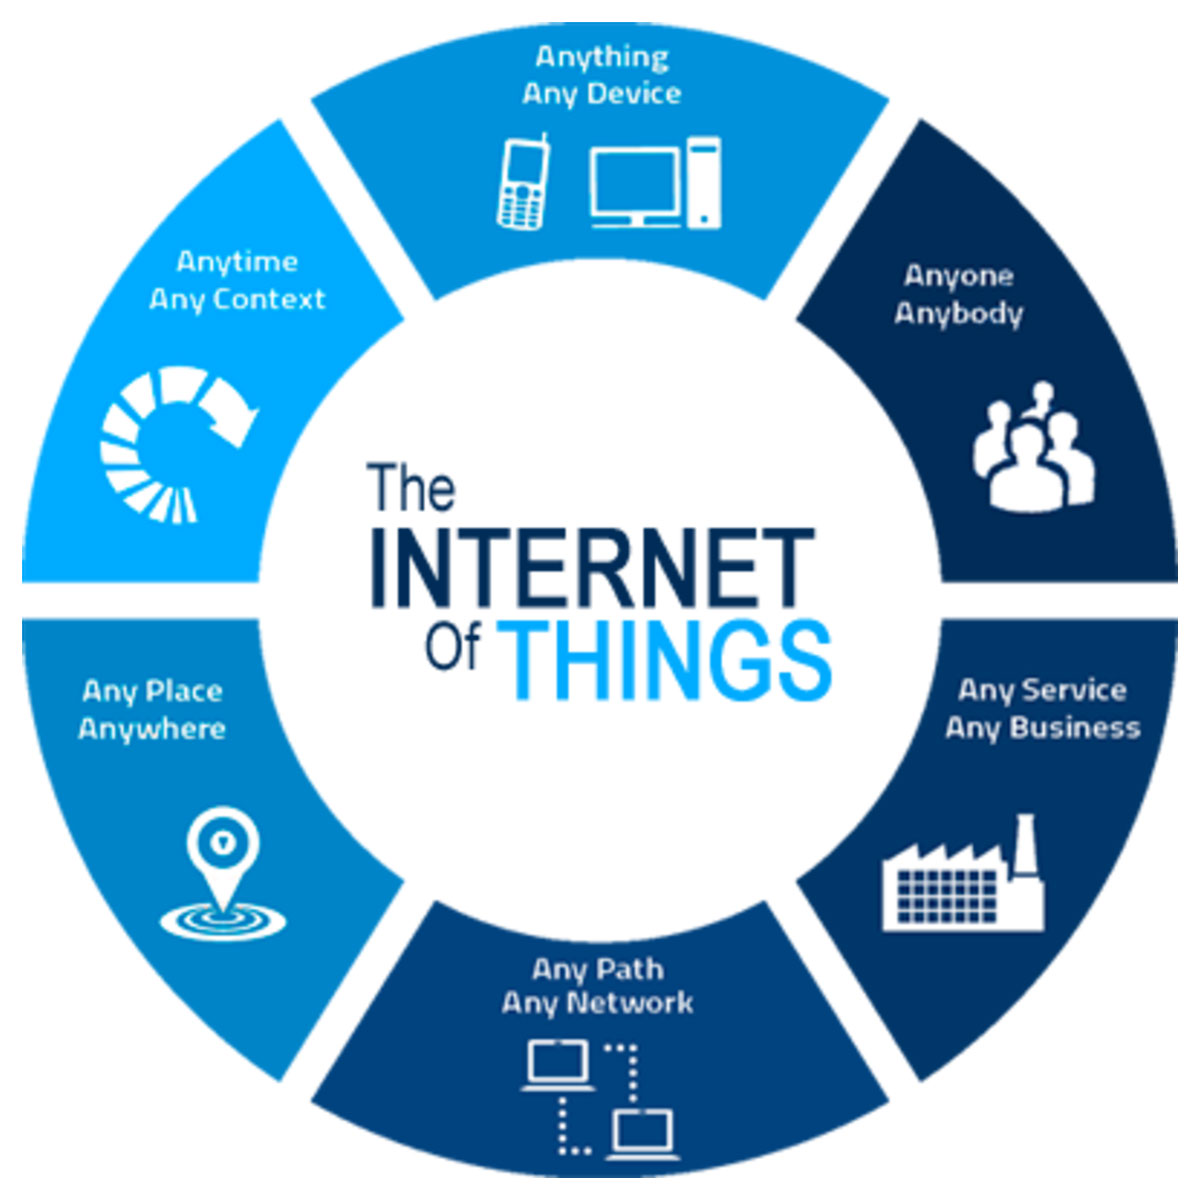 A conceptual overview of the Internet of Things (IoT)